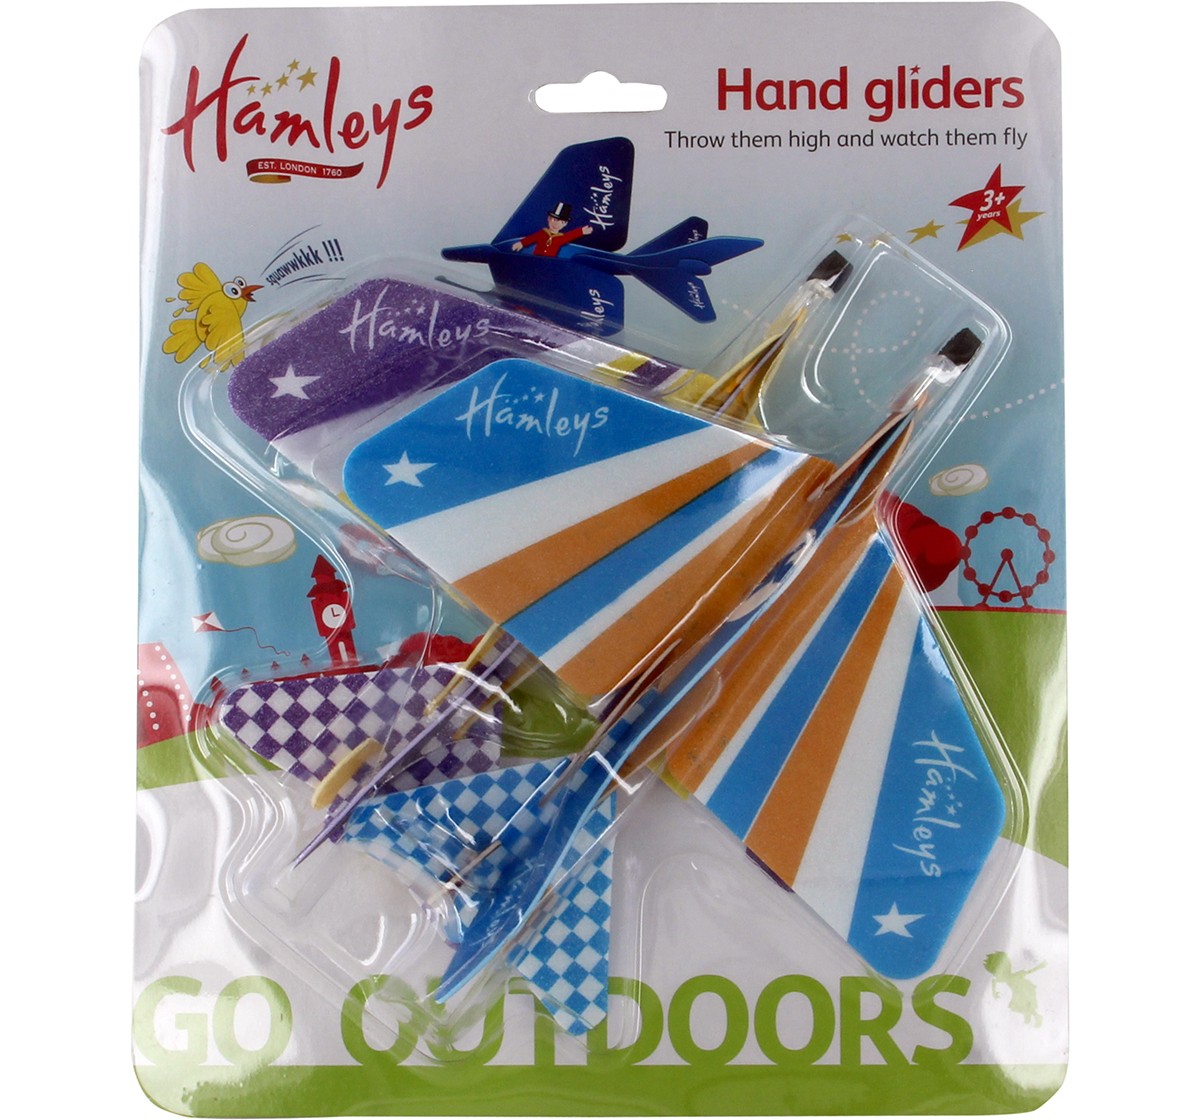  Hamleys Hand Gliders Plane Action Toy Games for Kids age 3Y+ 